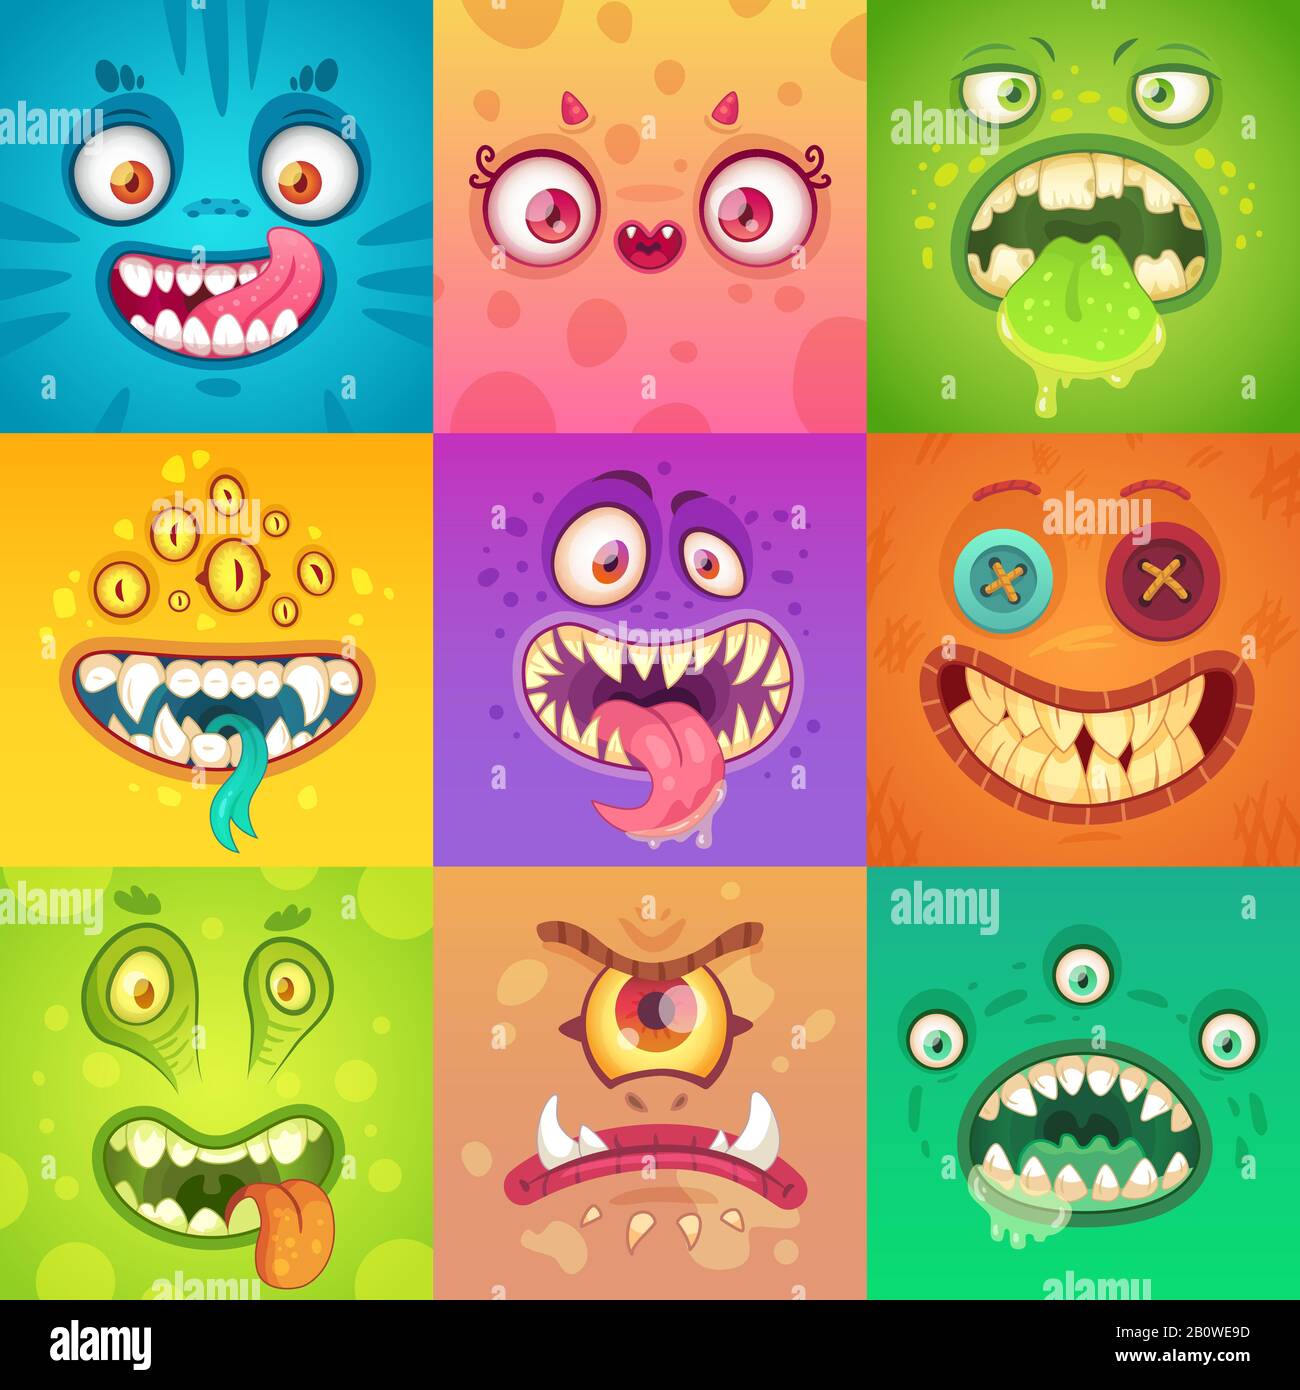 Funny halloween monsters. Cute and scary monster face with eyes and mouth. Strange creature mascot character vector illustration set Stock Vector